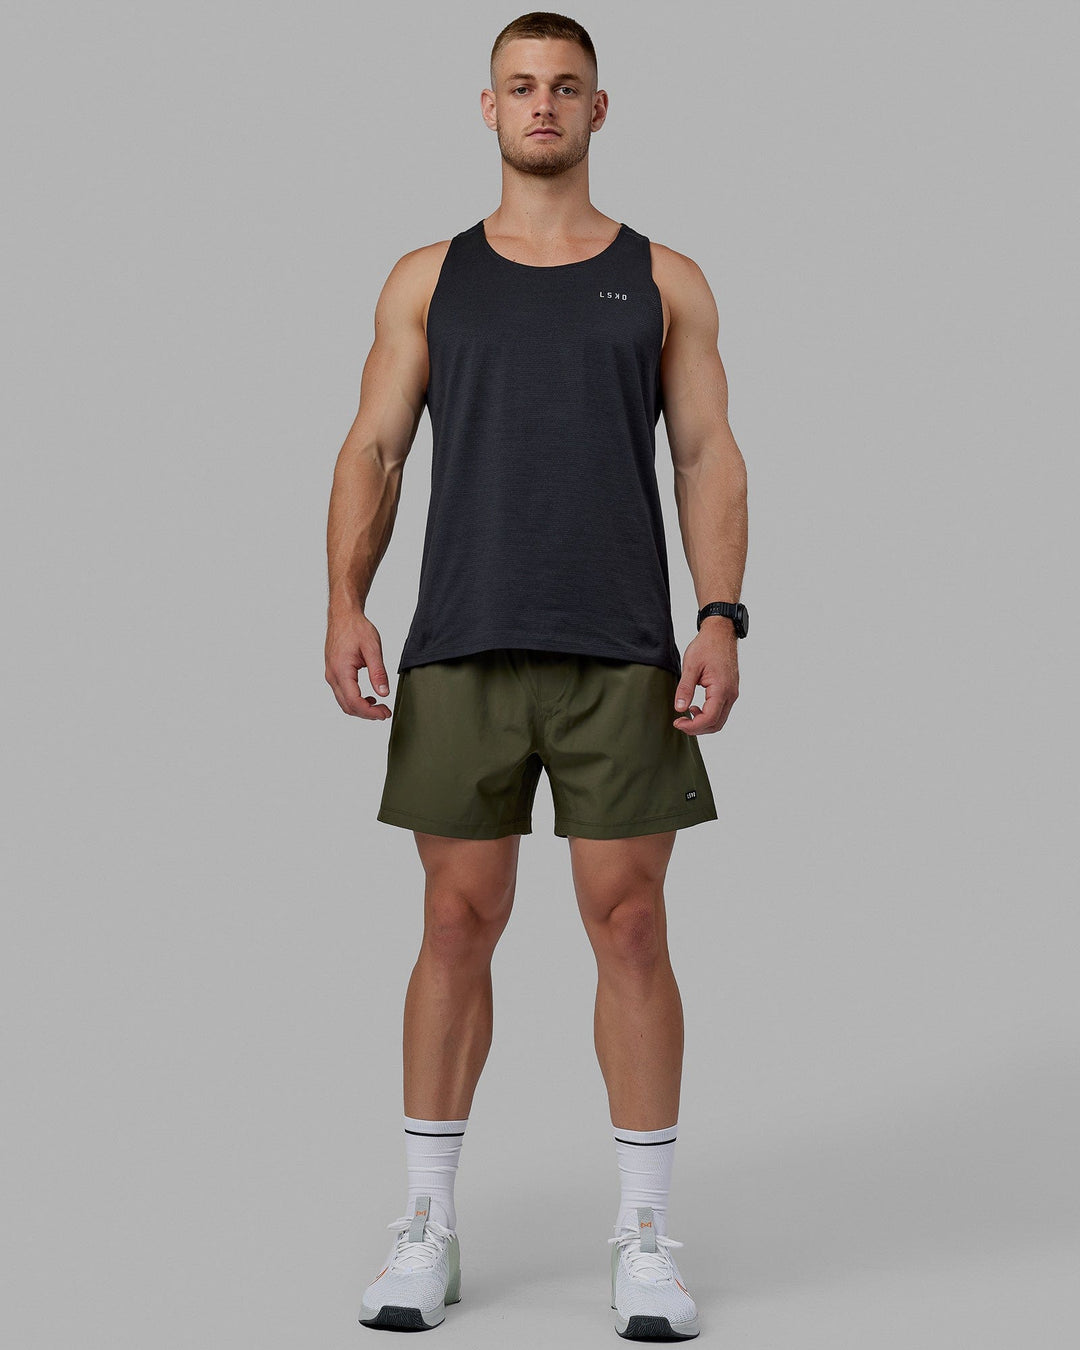 Man wearing Rep 5" Lined Performance Short - Forest Night